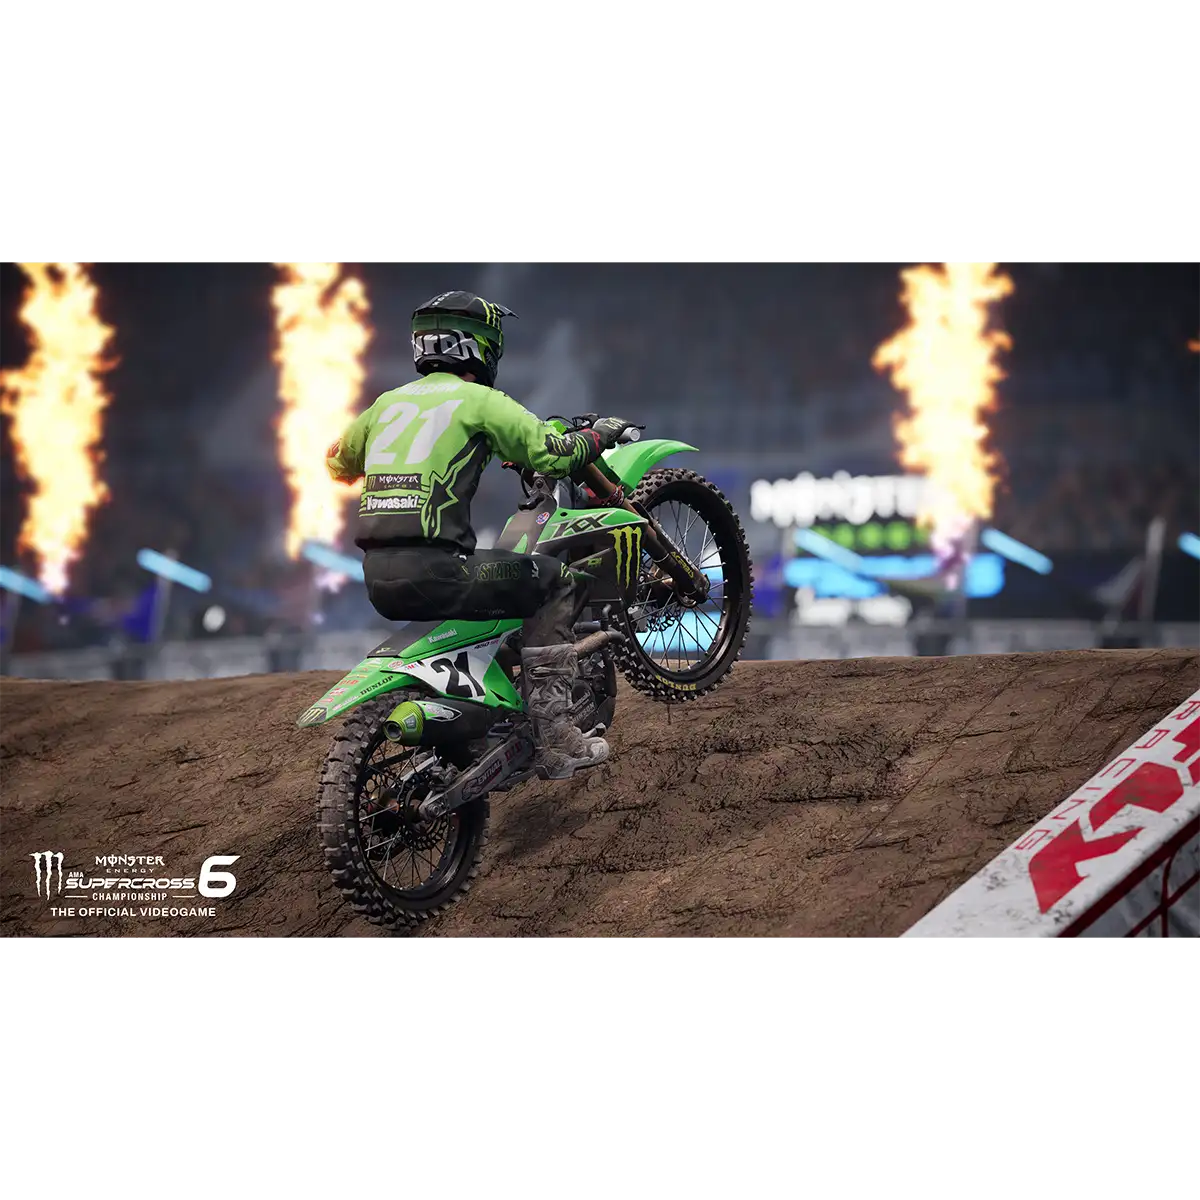 Monster Energy Supercross - The Official Videogame 6 (PS4) Image 5